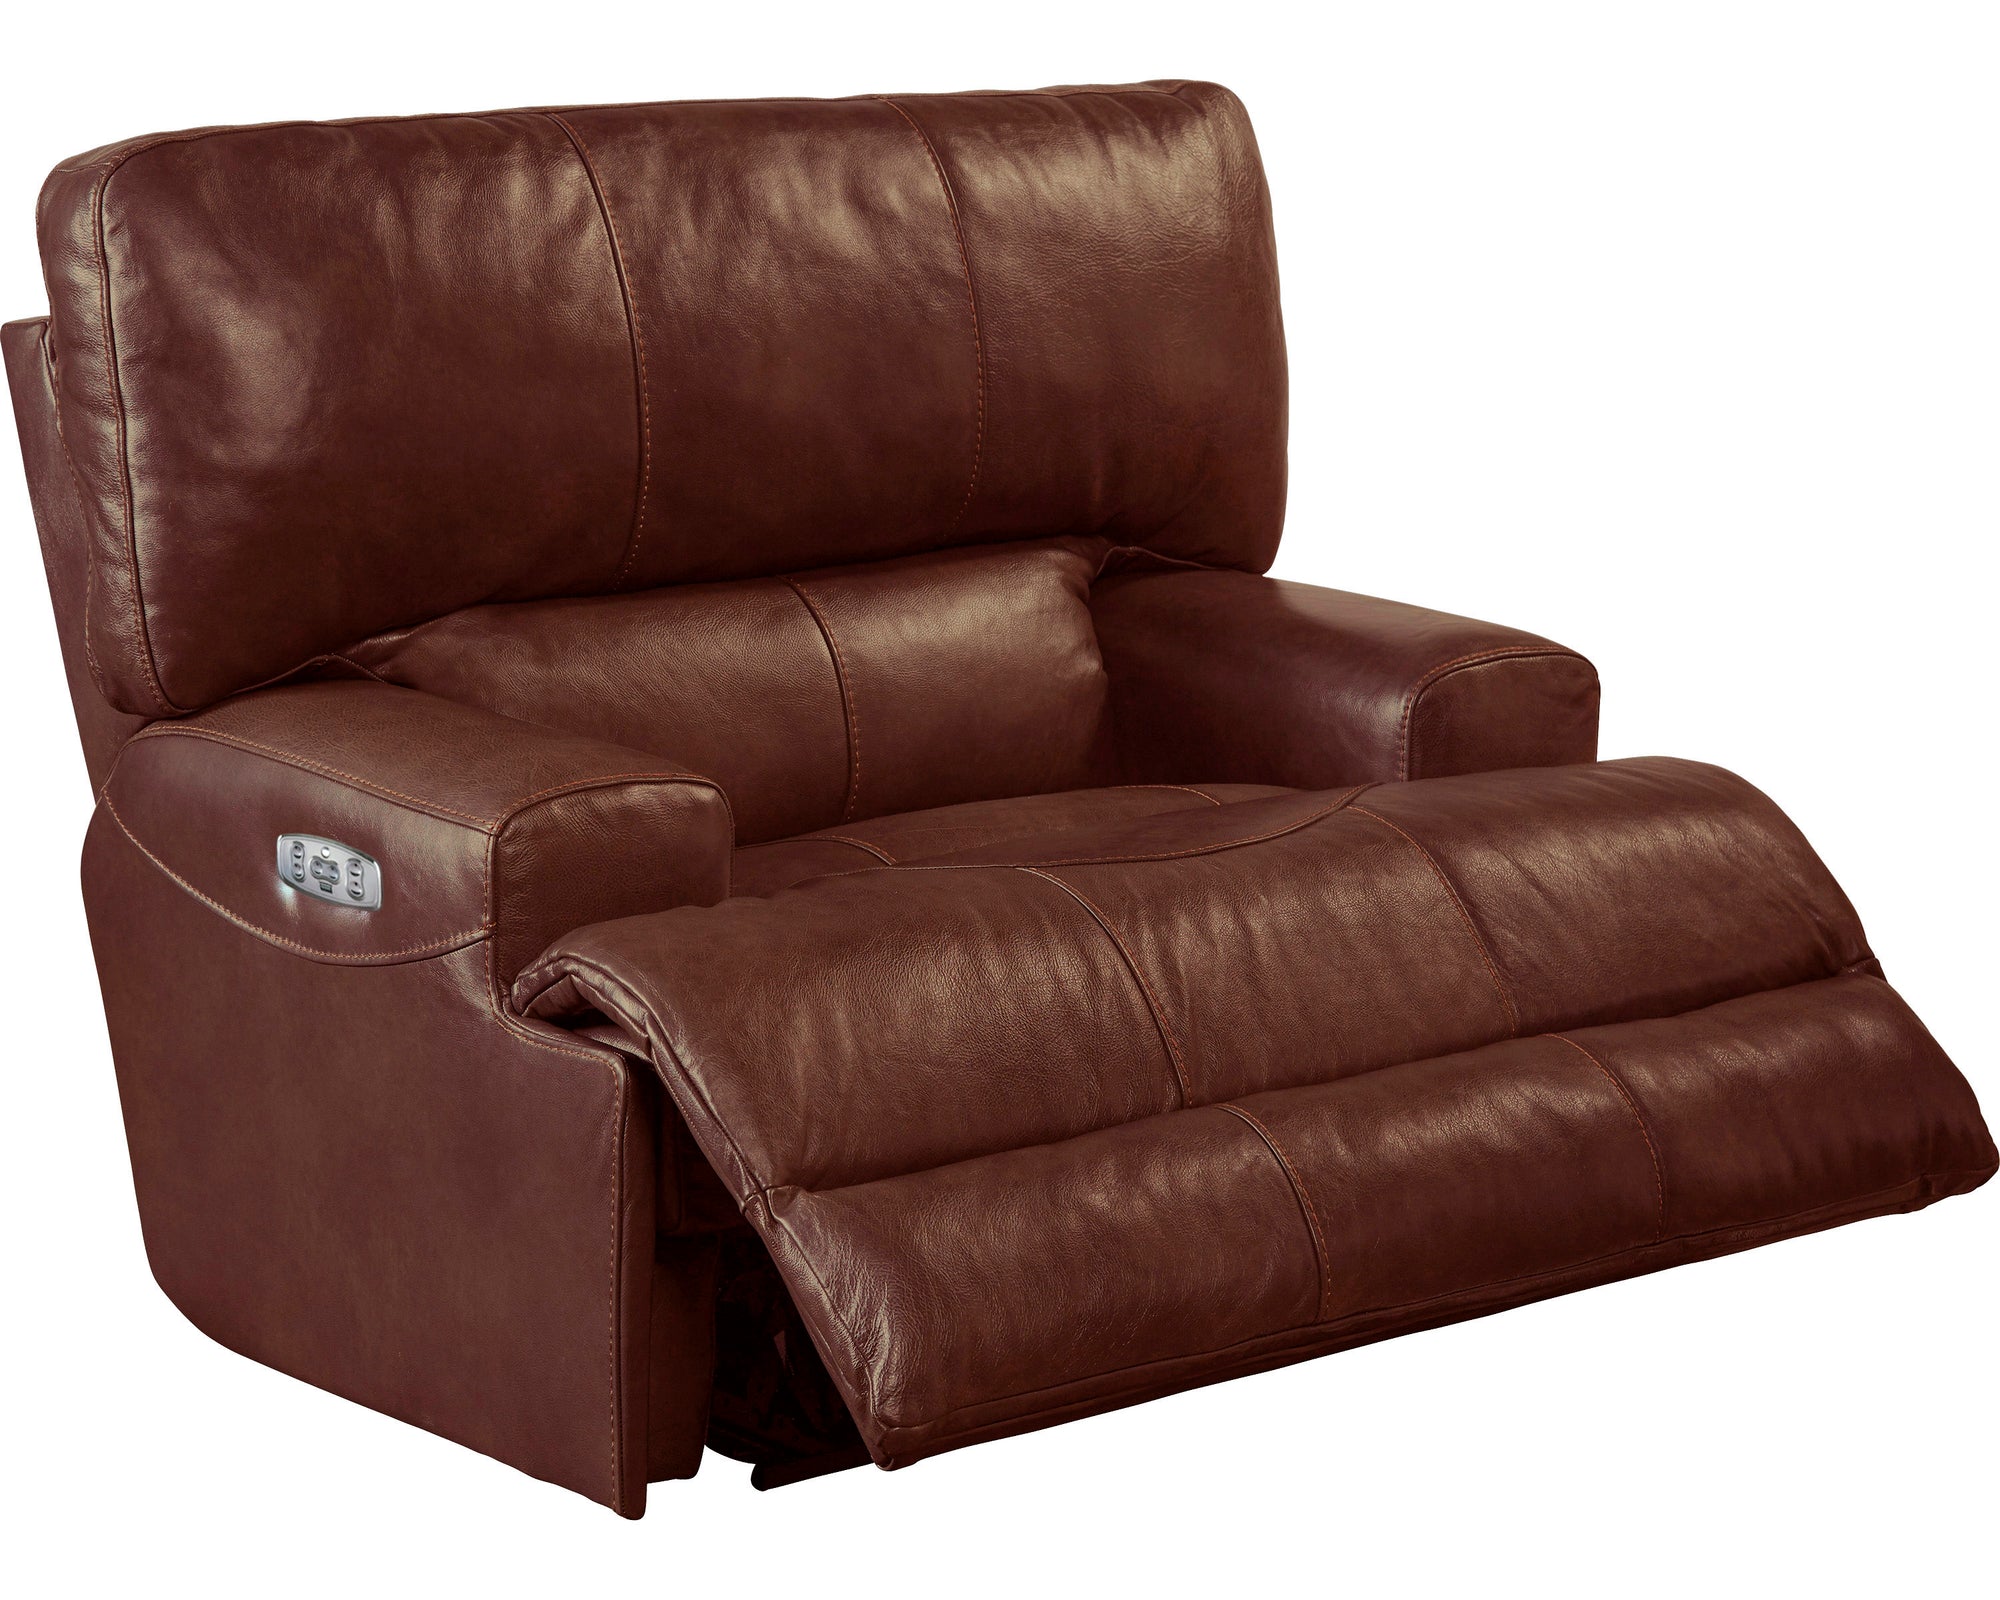 569 FI-CnJ Italian Leather Powered Sofa and Loveseat with Adjustable Headrest and Lumbar